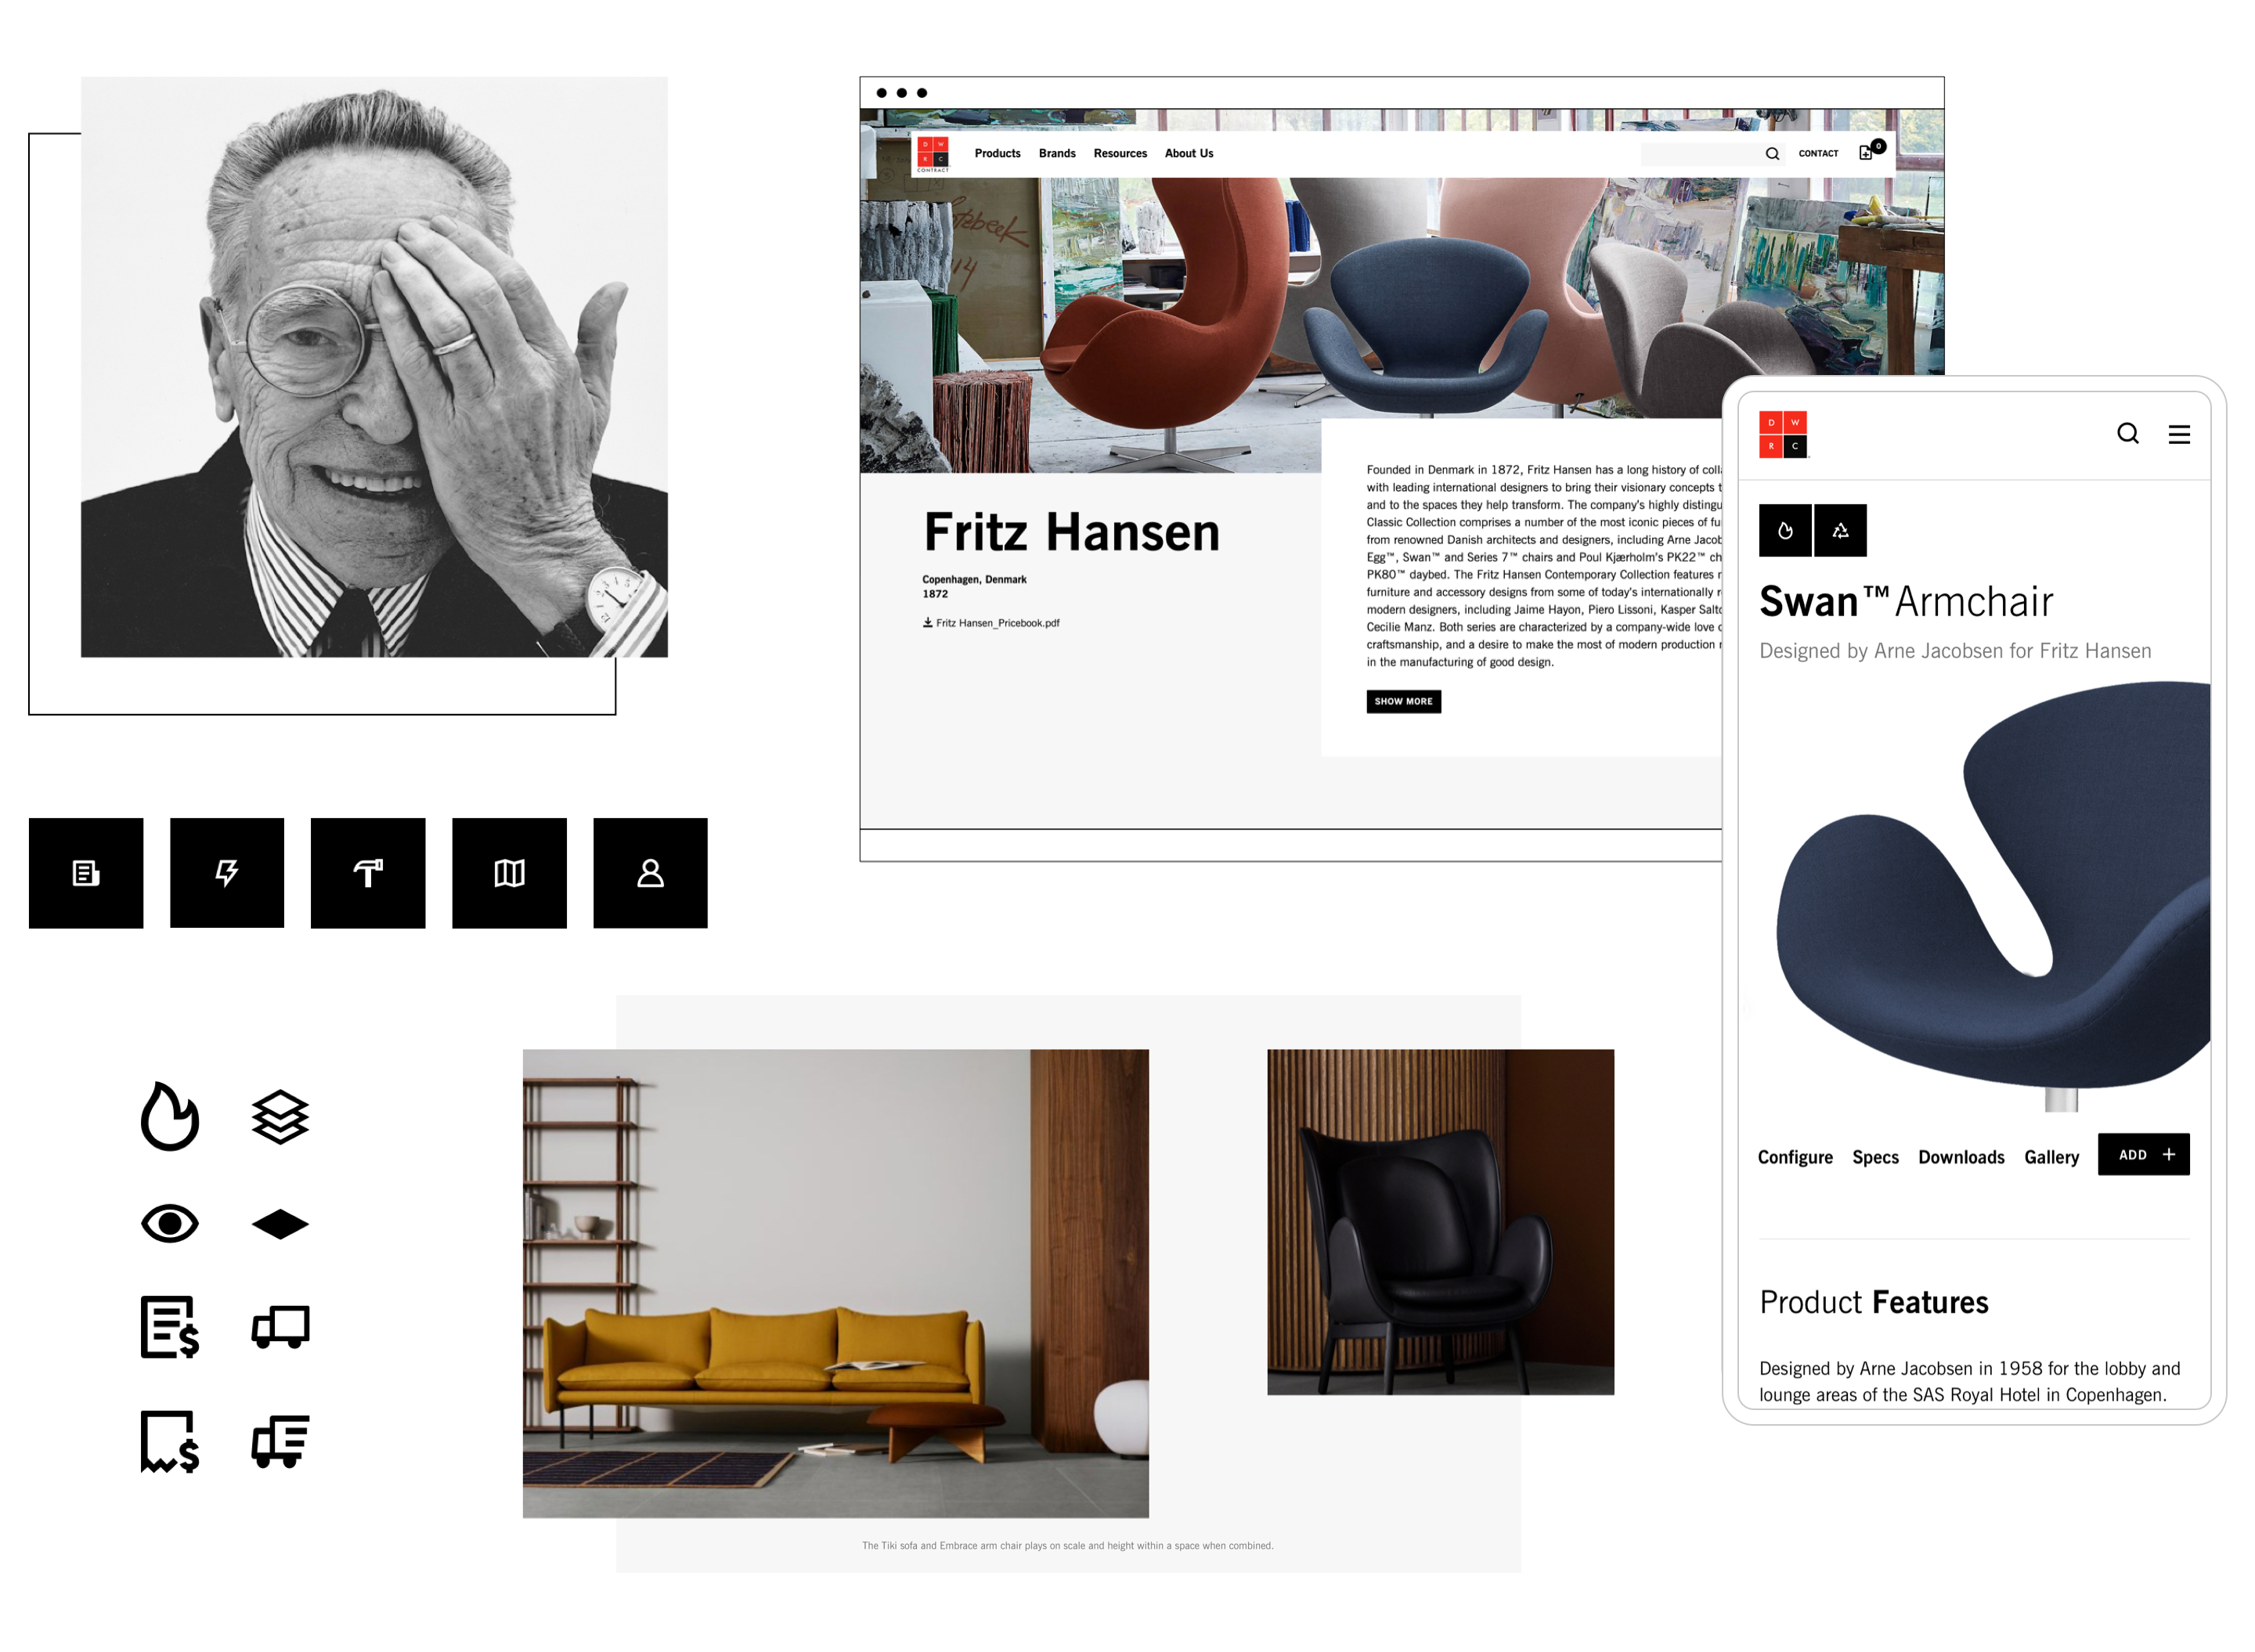 Collage of design elements including designer Achille Castiglioni wearing a suit and tie, spectacle eyeglasses with one hand over left eye. Fritz Hansen brand detail page, and DWRC site details